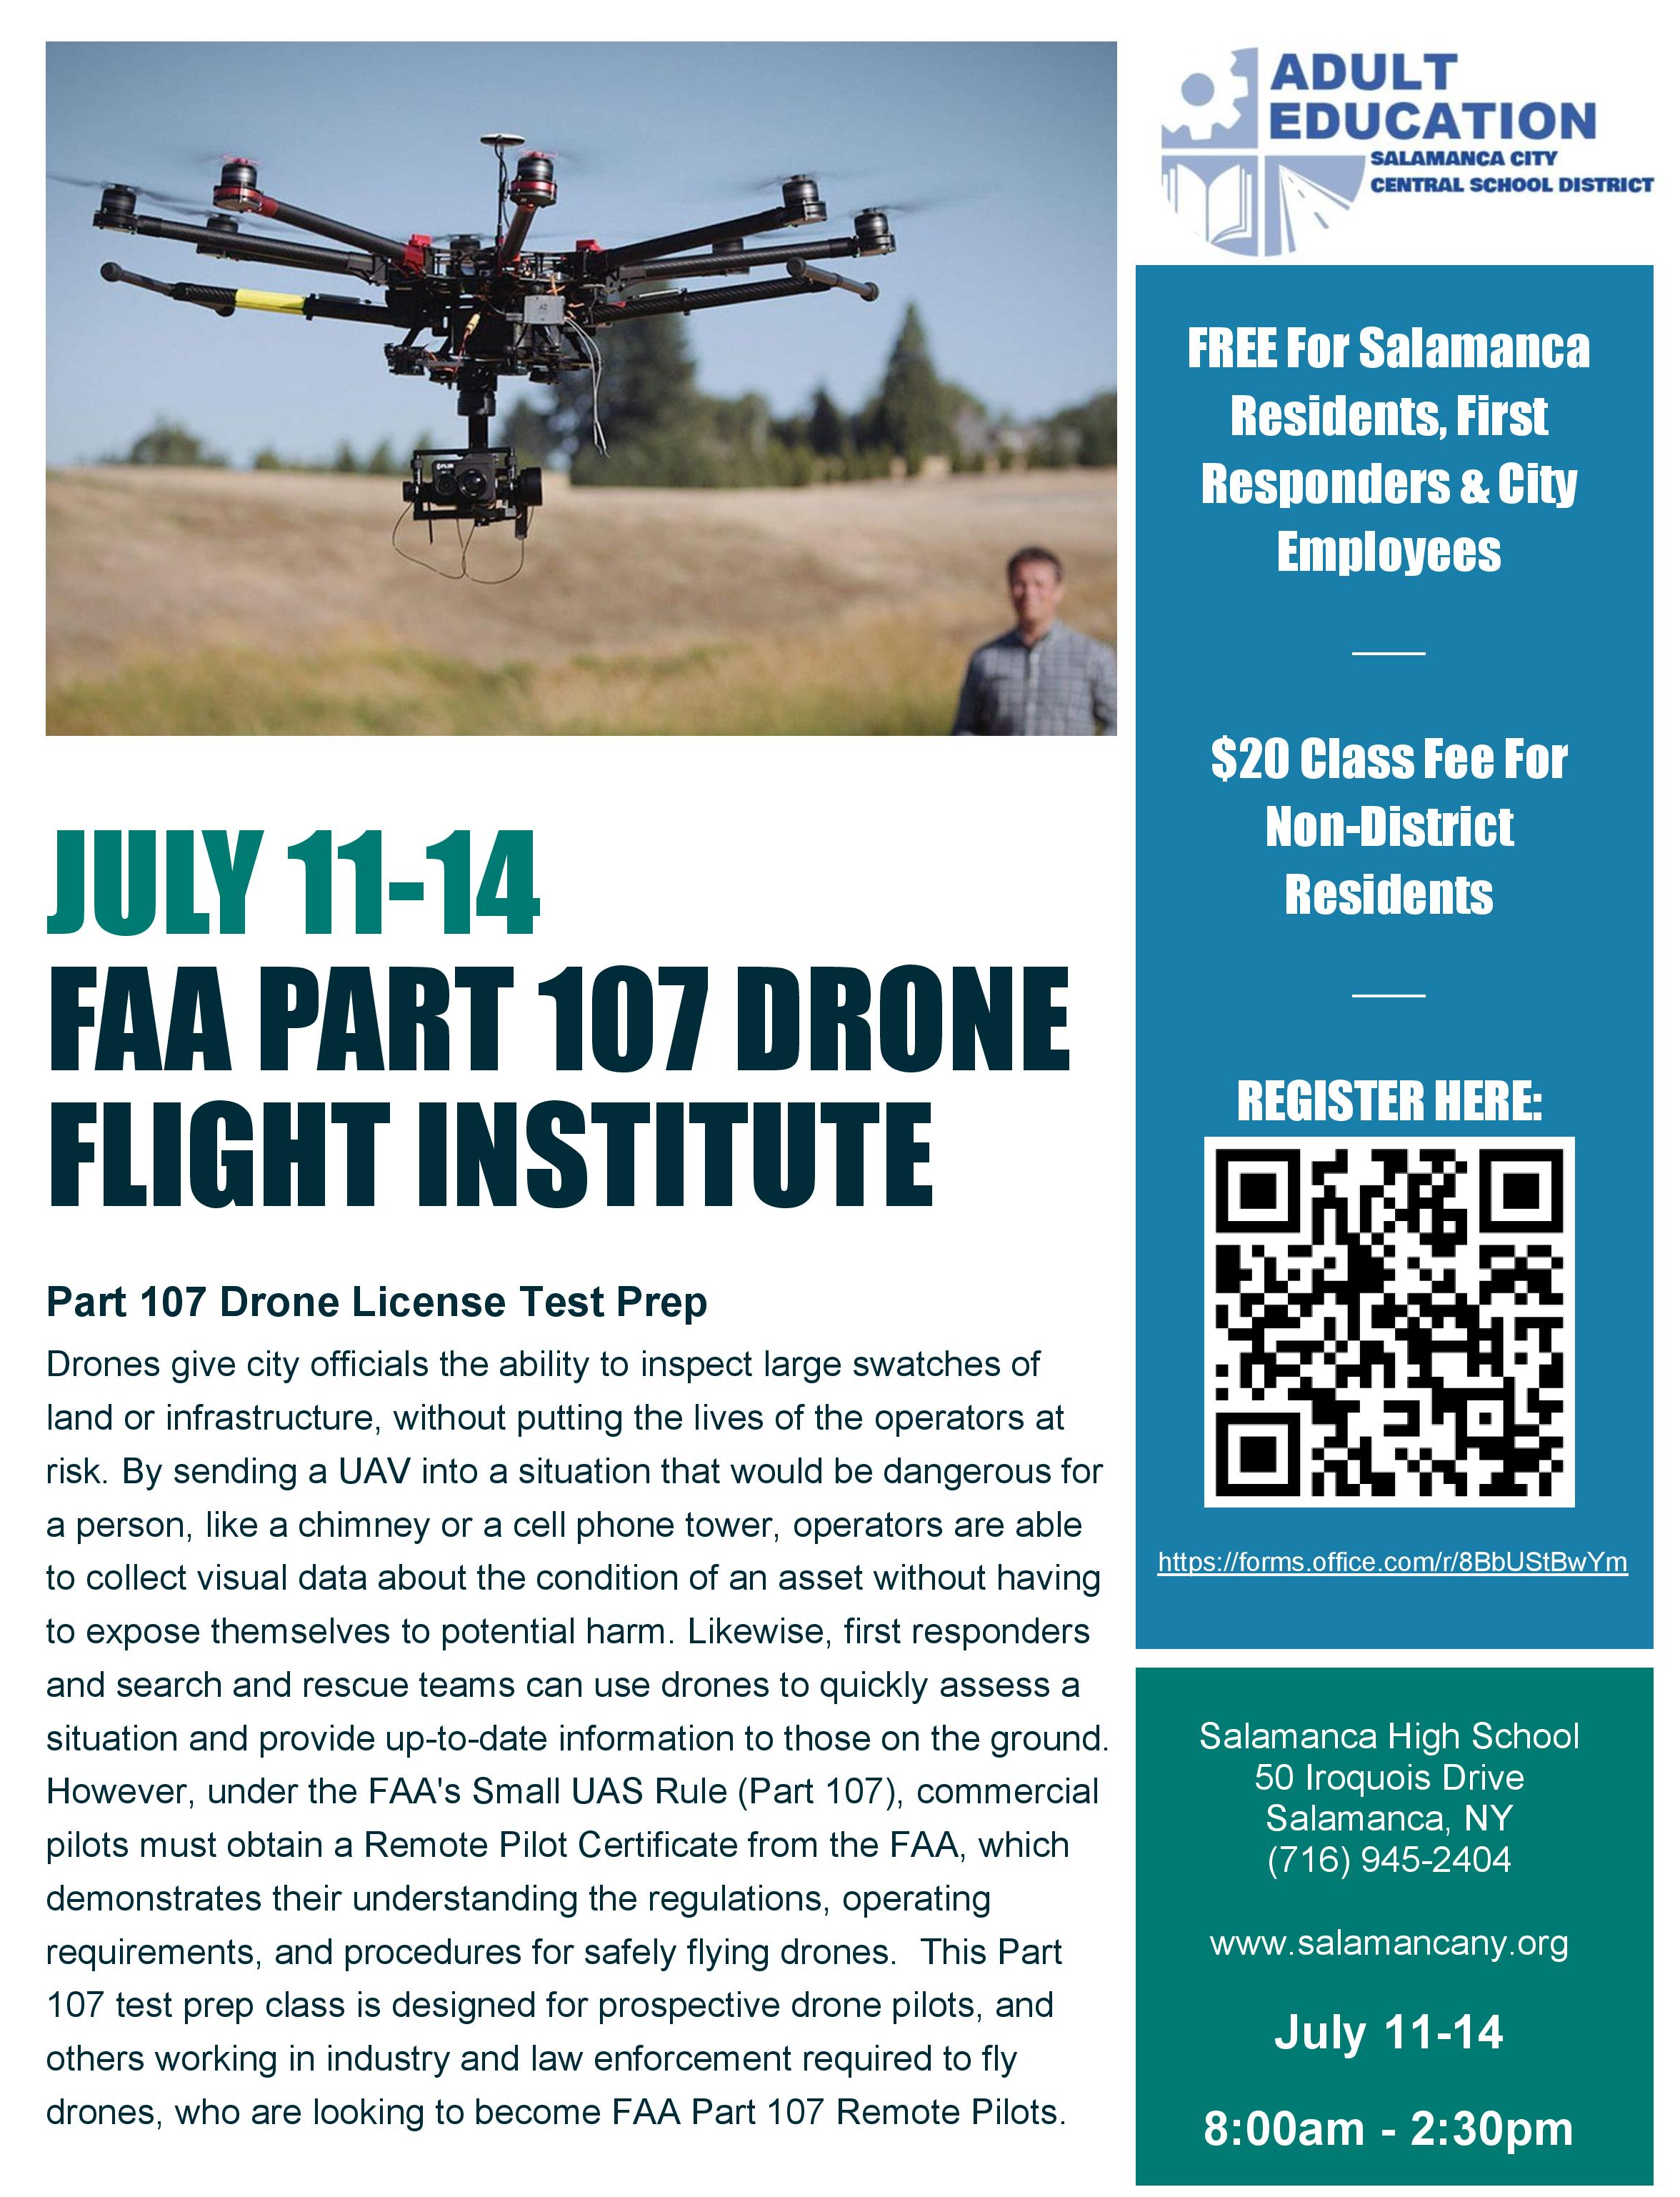 Drone Course flyer